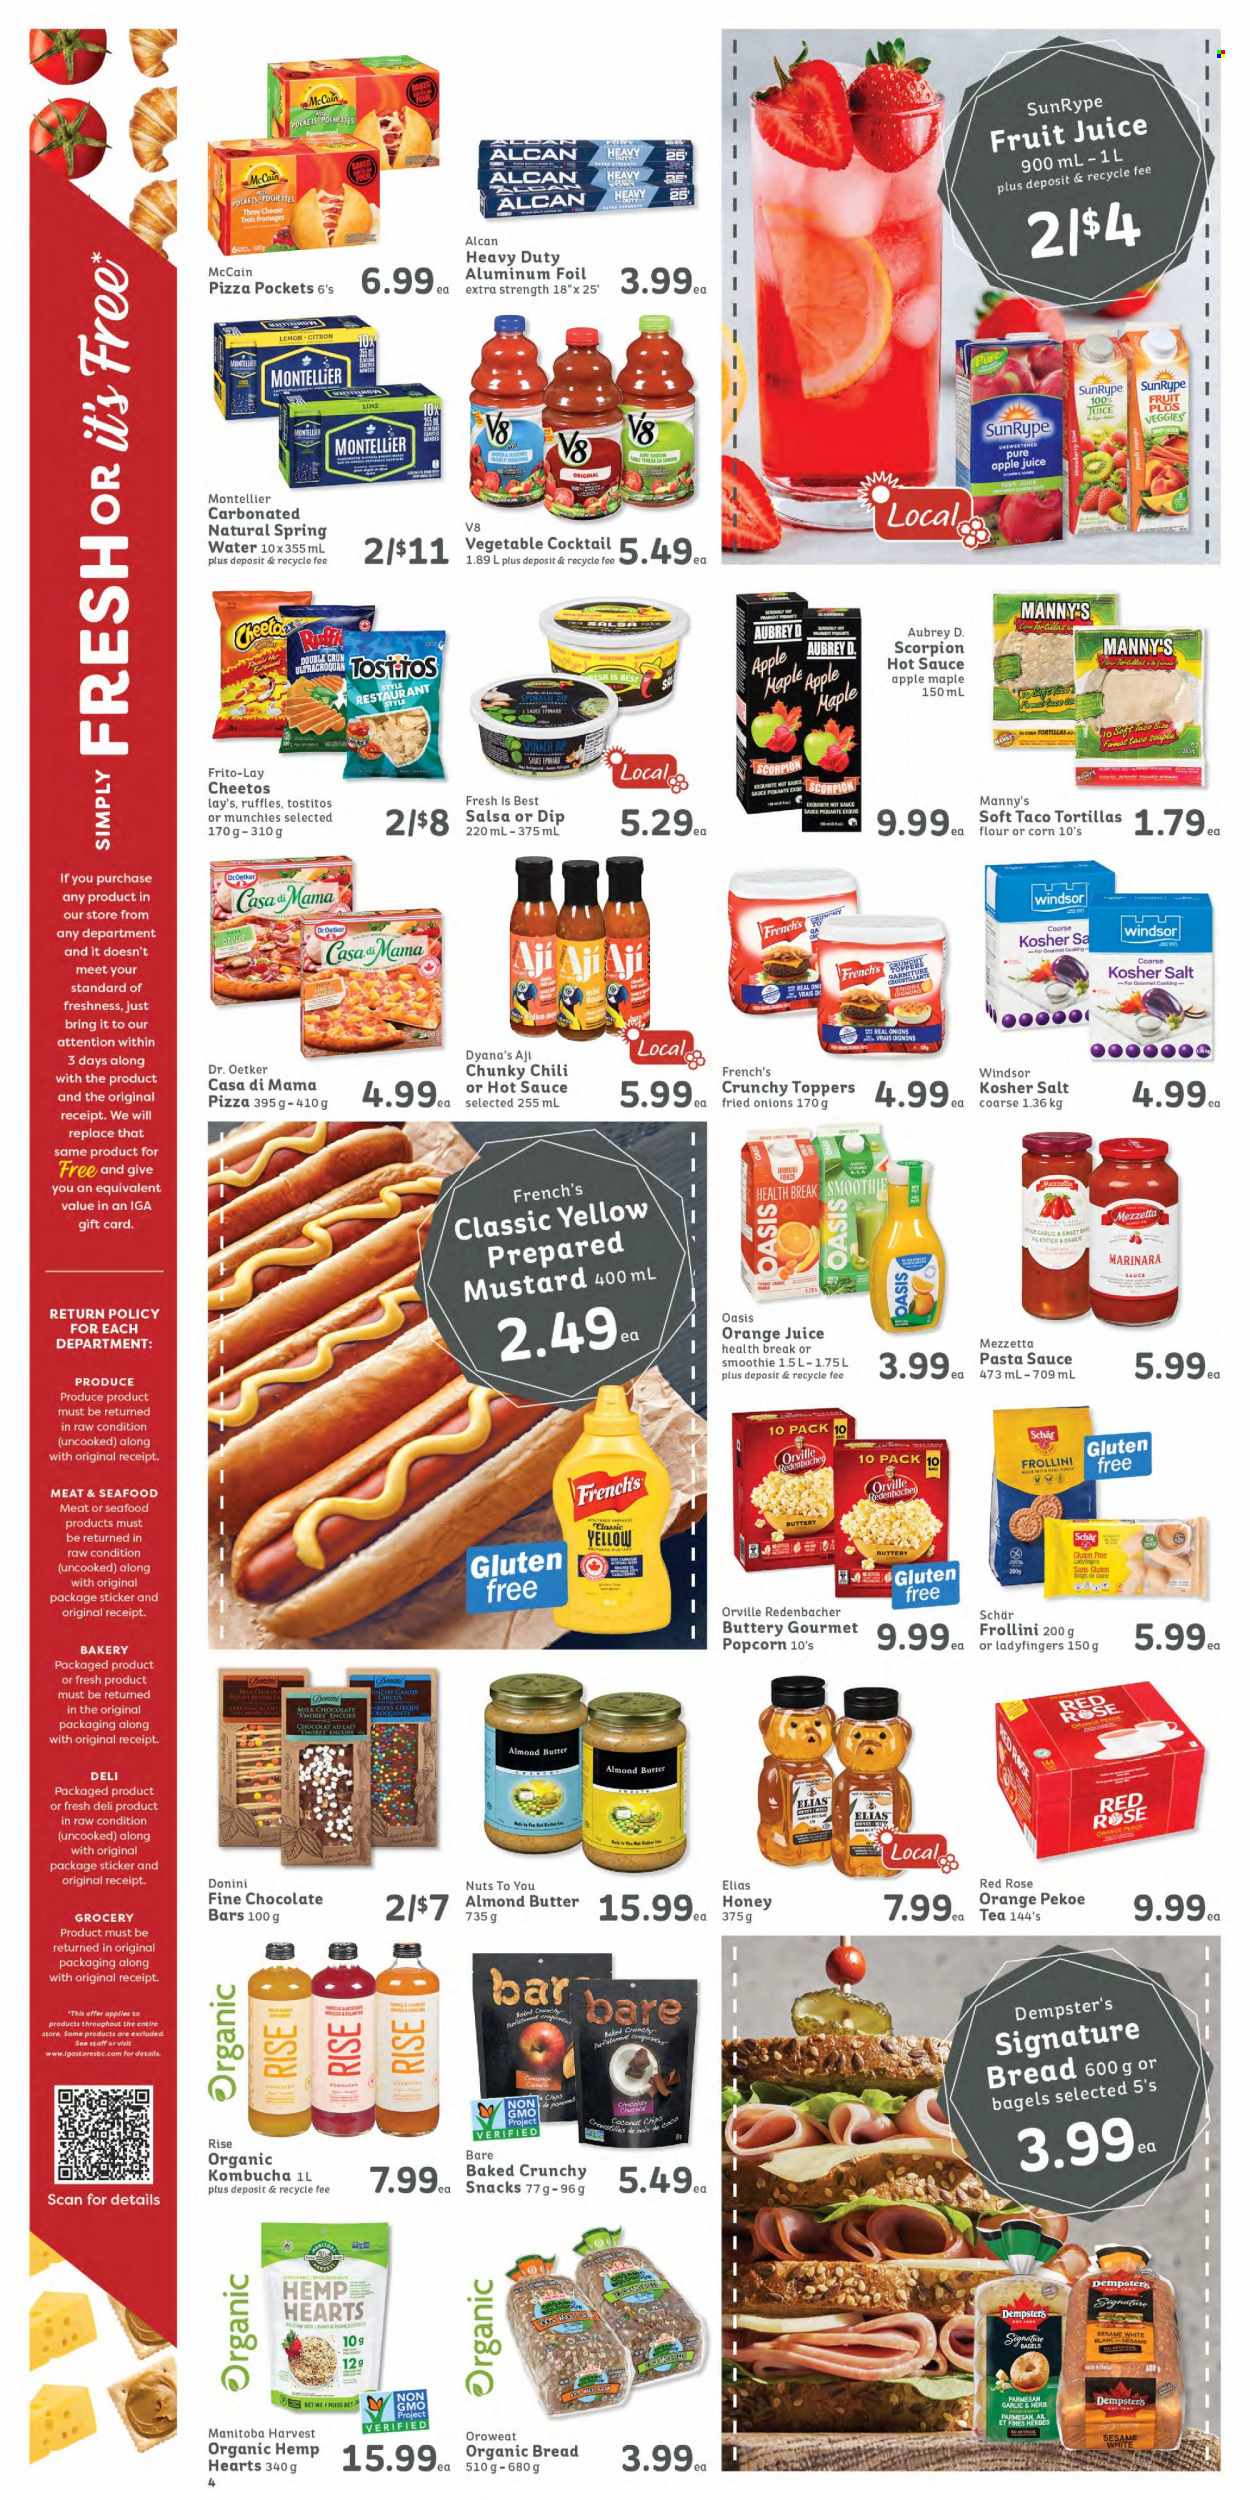 thumbnail - IGA Simple Goodness Flyer - February 03, 2023 - February 09, 2023 - Sales products - bagels, bread, corn tortillas, tortillas, coconut, seafood, pizza, pasta sauce, sauce, parmesan, Dr. Oetker, milk, almond butter, dip, spinach dip, McCain, snack, chocolate bar, Cheetos, chips, Lay’s, popcorn, Frito-Lay, Ruffles, Tostitos, cinnamon, mustard, hot sauce, salsa, honey, peanut butter, nut butter, apple juice, orange juice, juice, fruit juice, smoothie, spring water, kombucha, tea, rosé wine, Sol. Page 4.